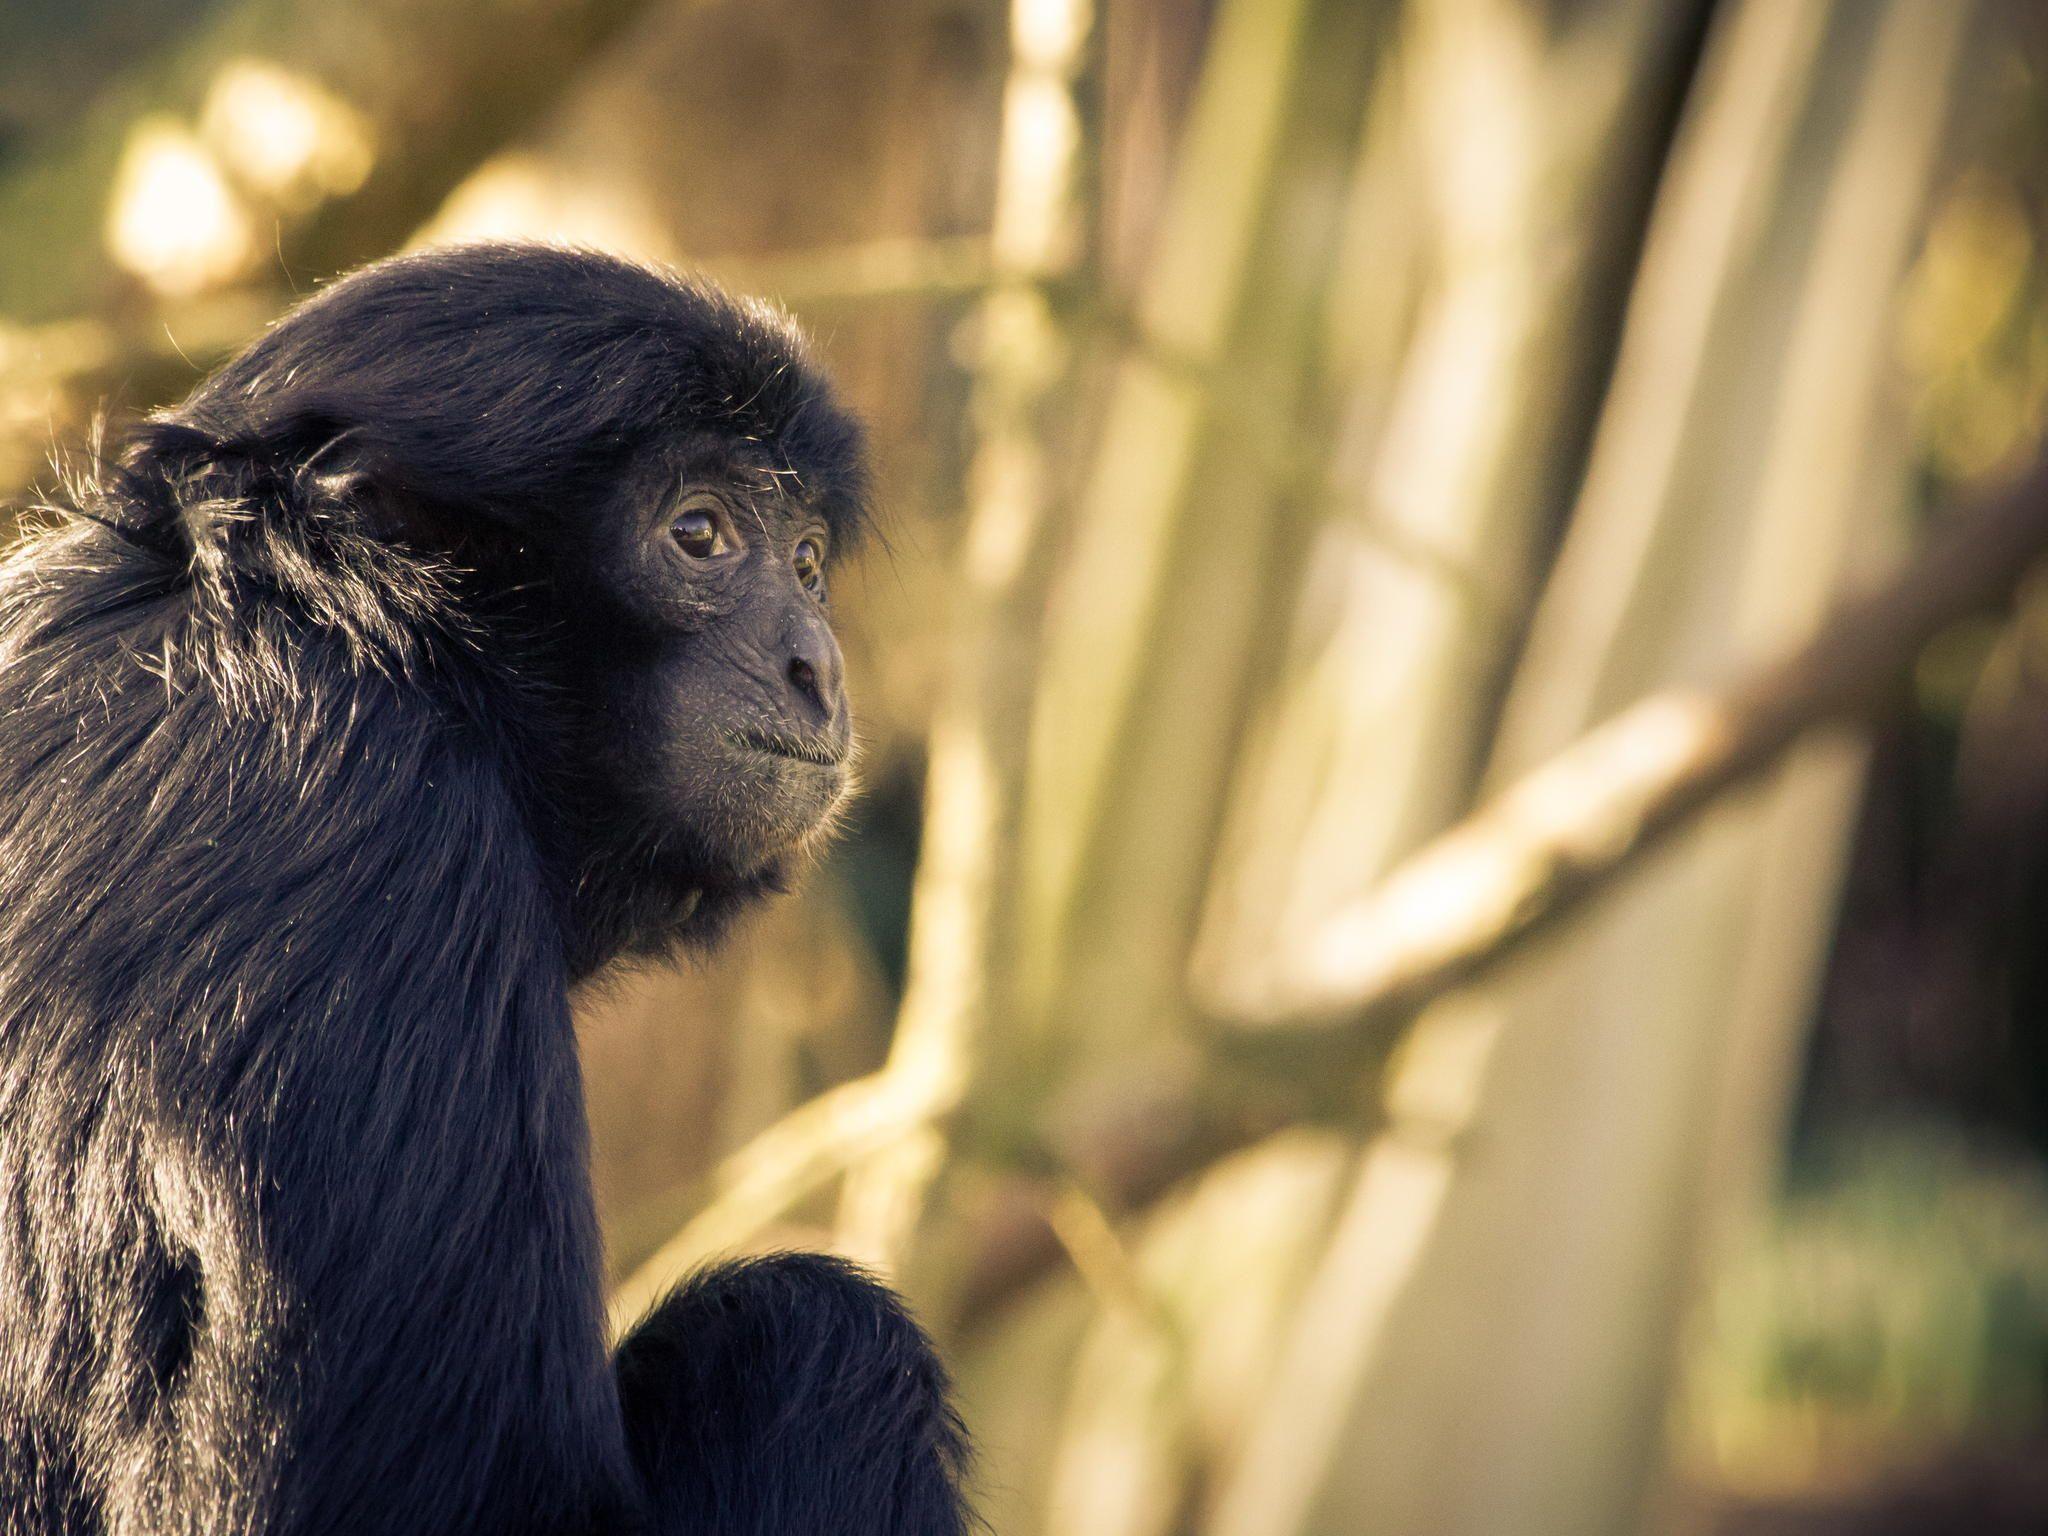 Siamang by mel anie on 500px. <3 Science & Nature